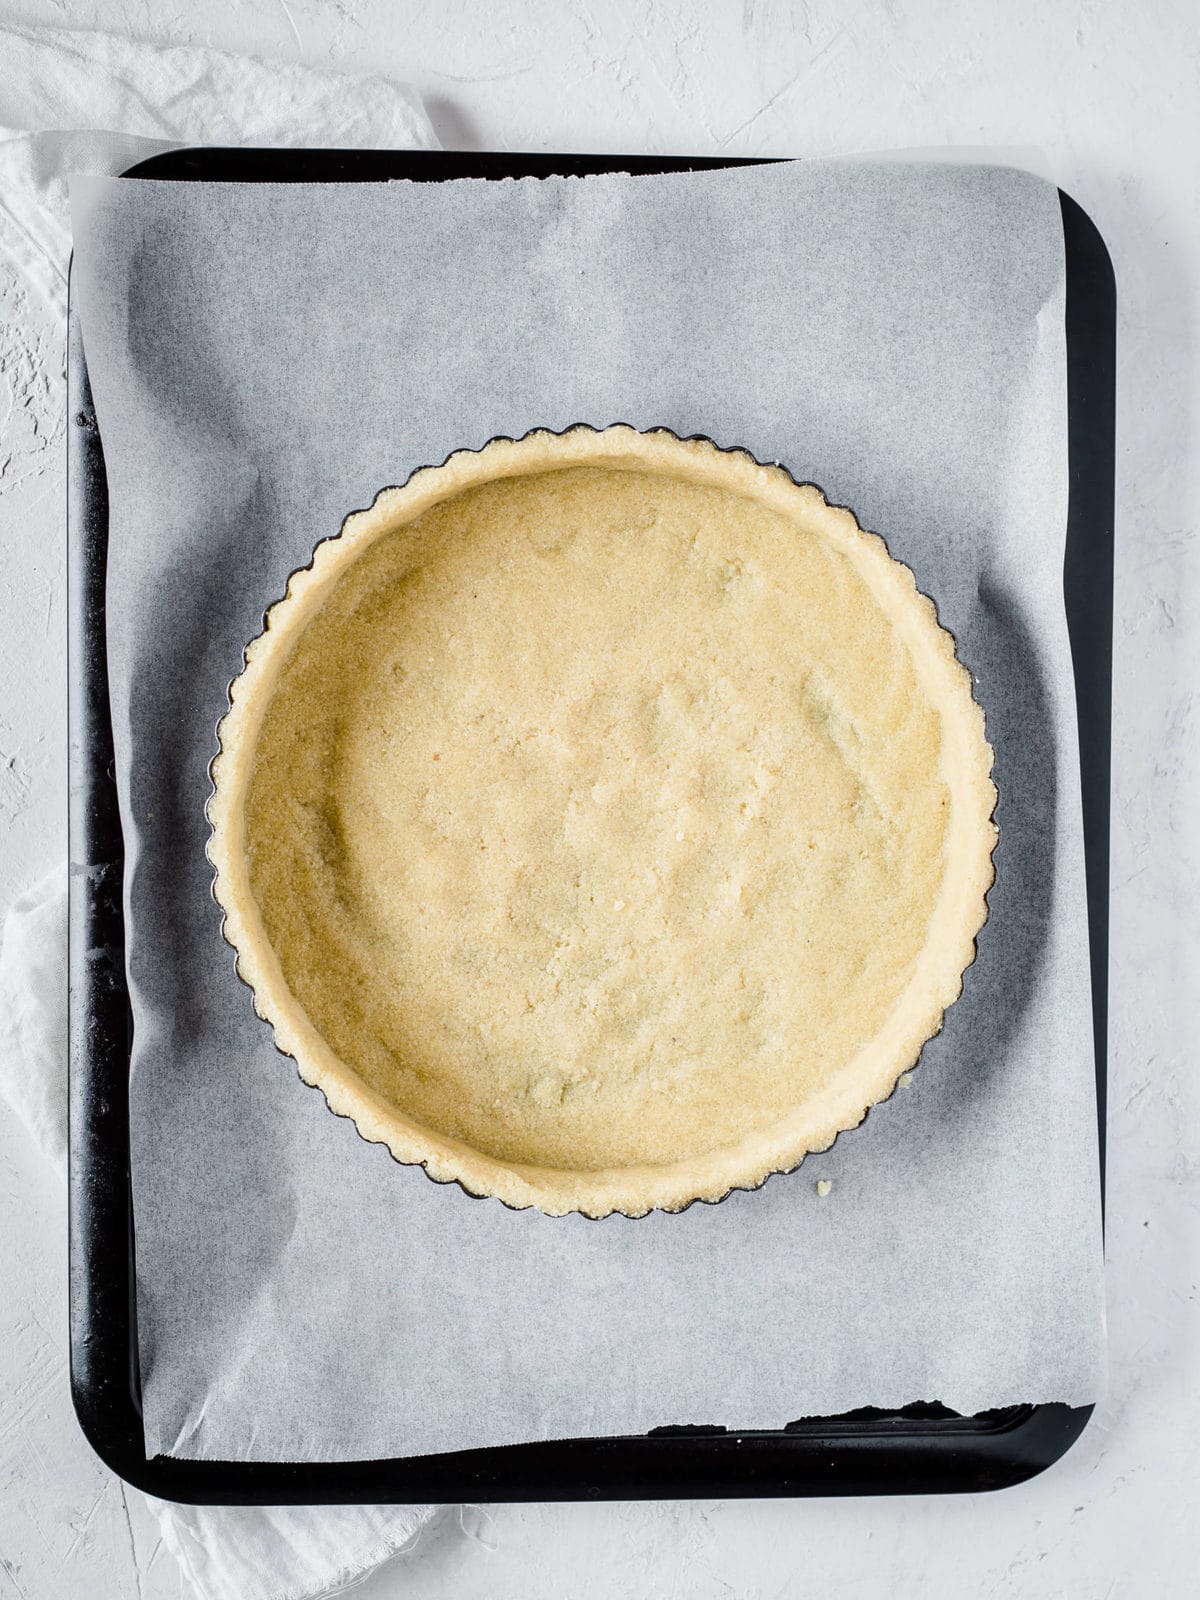 a gluten free and low carb pie crust, pressed into a tart pan, ready to be baked.